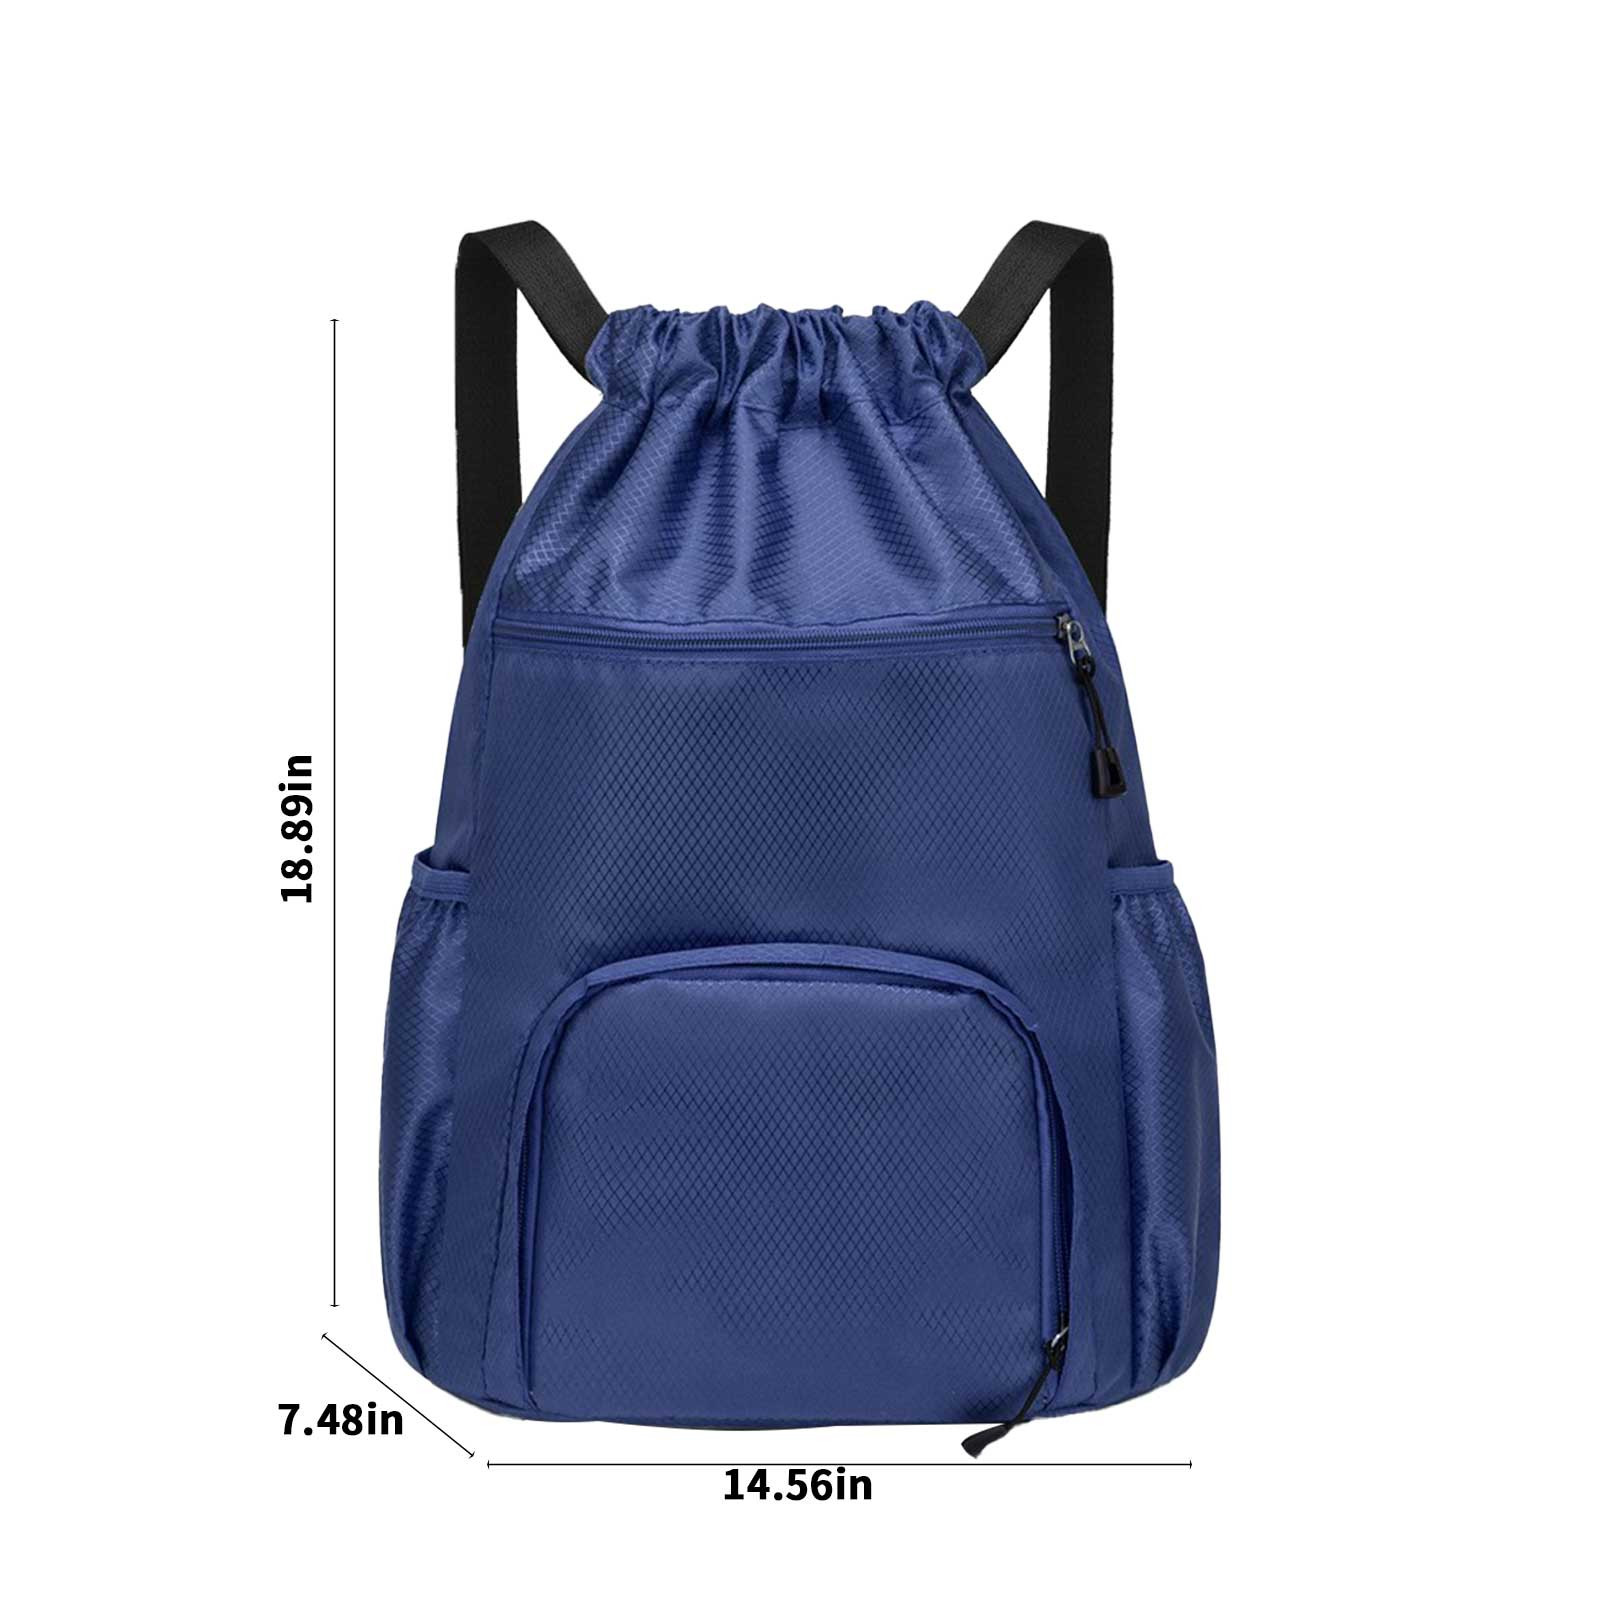 Sports Outdoors Sports Accessories Mesh Basketball Football Bag With Ball And Shoe Compartment For Boys Girls Man Women Ball Equipment Pack Soccer Backpack Sports Volleyball Dark Blue - image 3 of 8